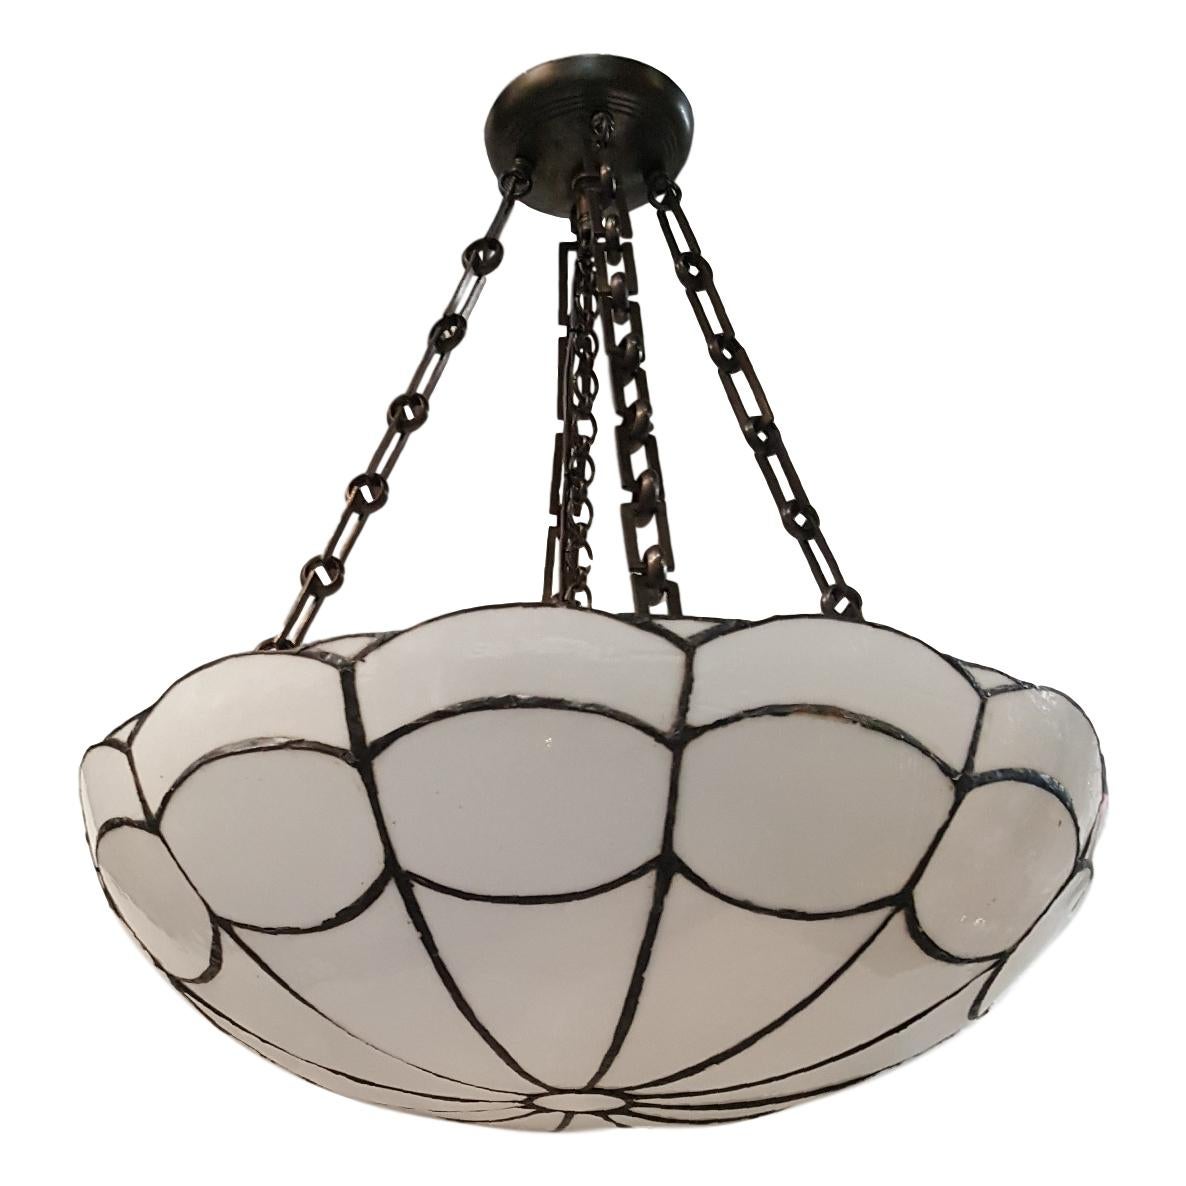 Set of four English circa 1920s leaded glass pendant light fixtures. Sold individually.

Measurements:
Diameter: 21